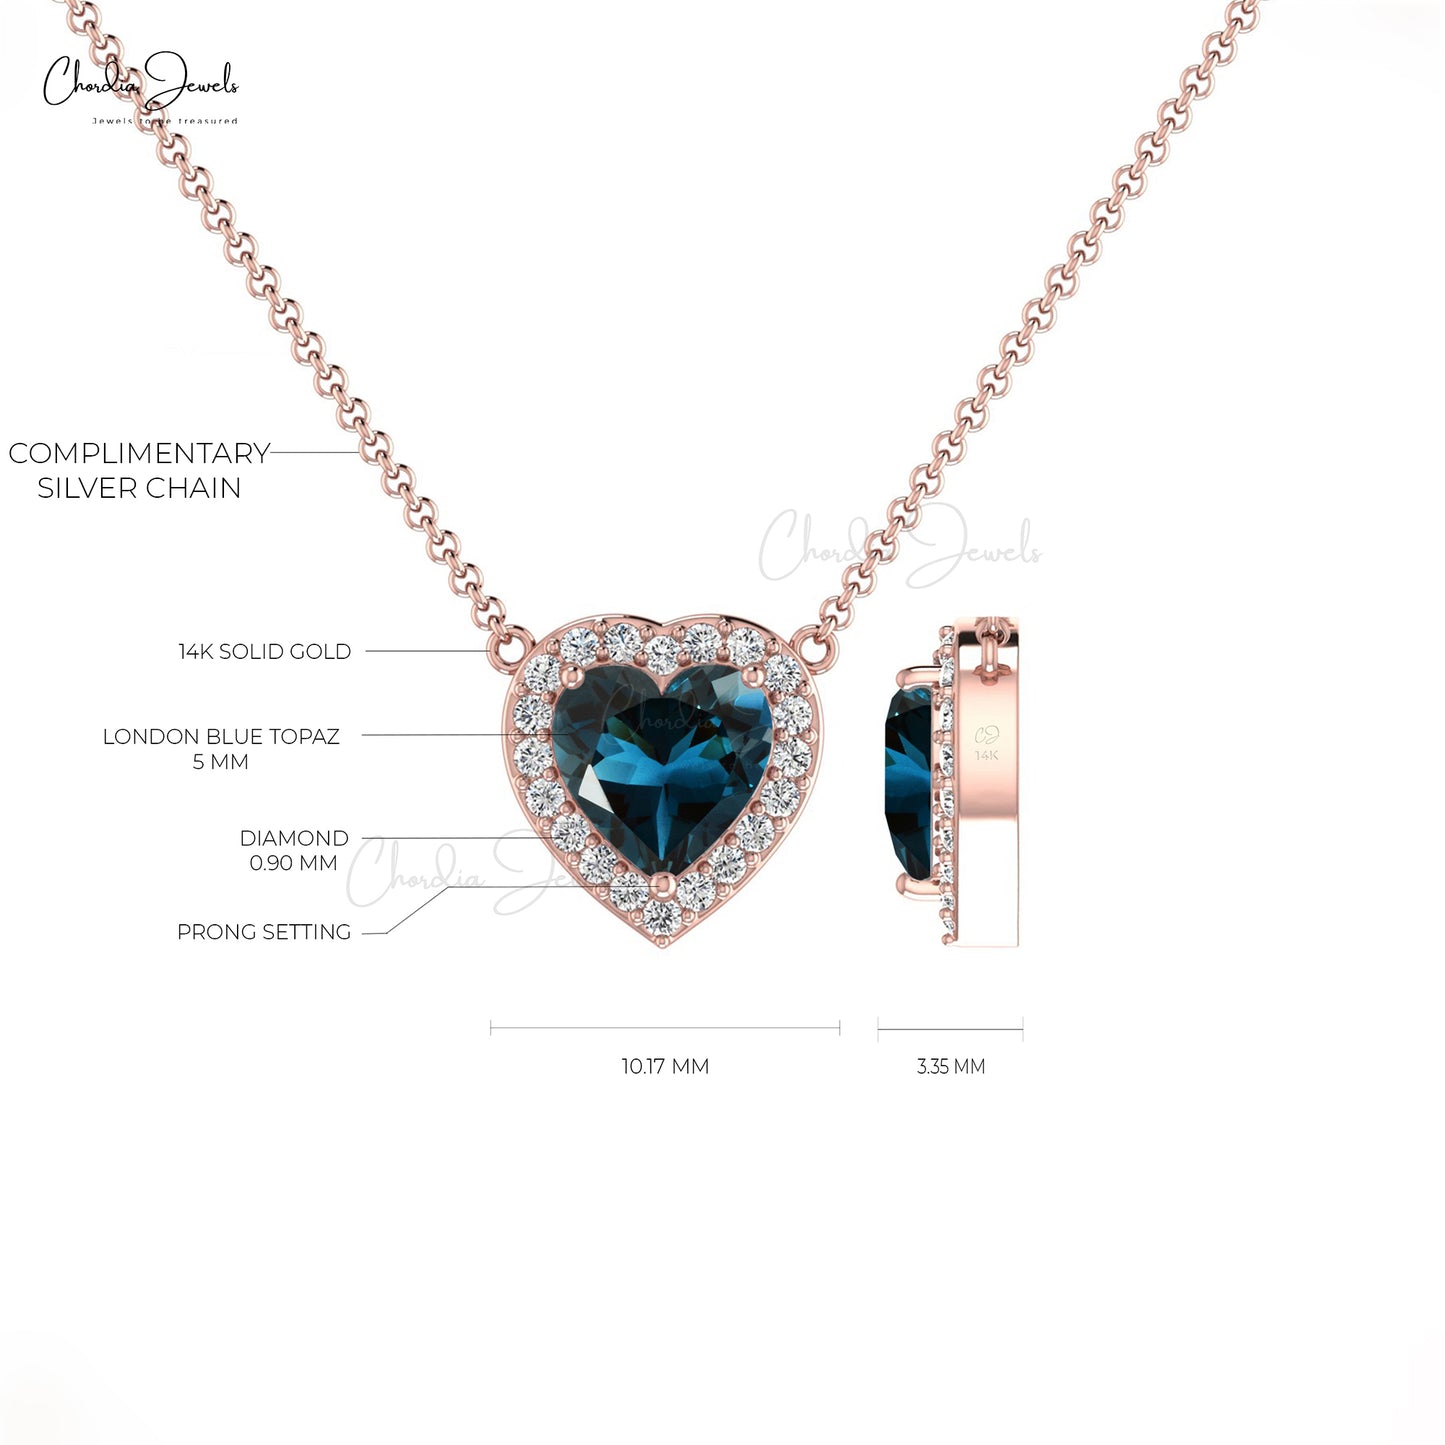 Natural London Blue Topaz Necklace, 5mm Heart Shape Gemstone Necklace, 14k Solid Gold Diamond Handmade Necklace Gift for Her